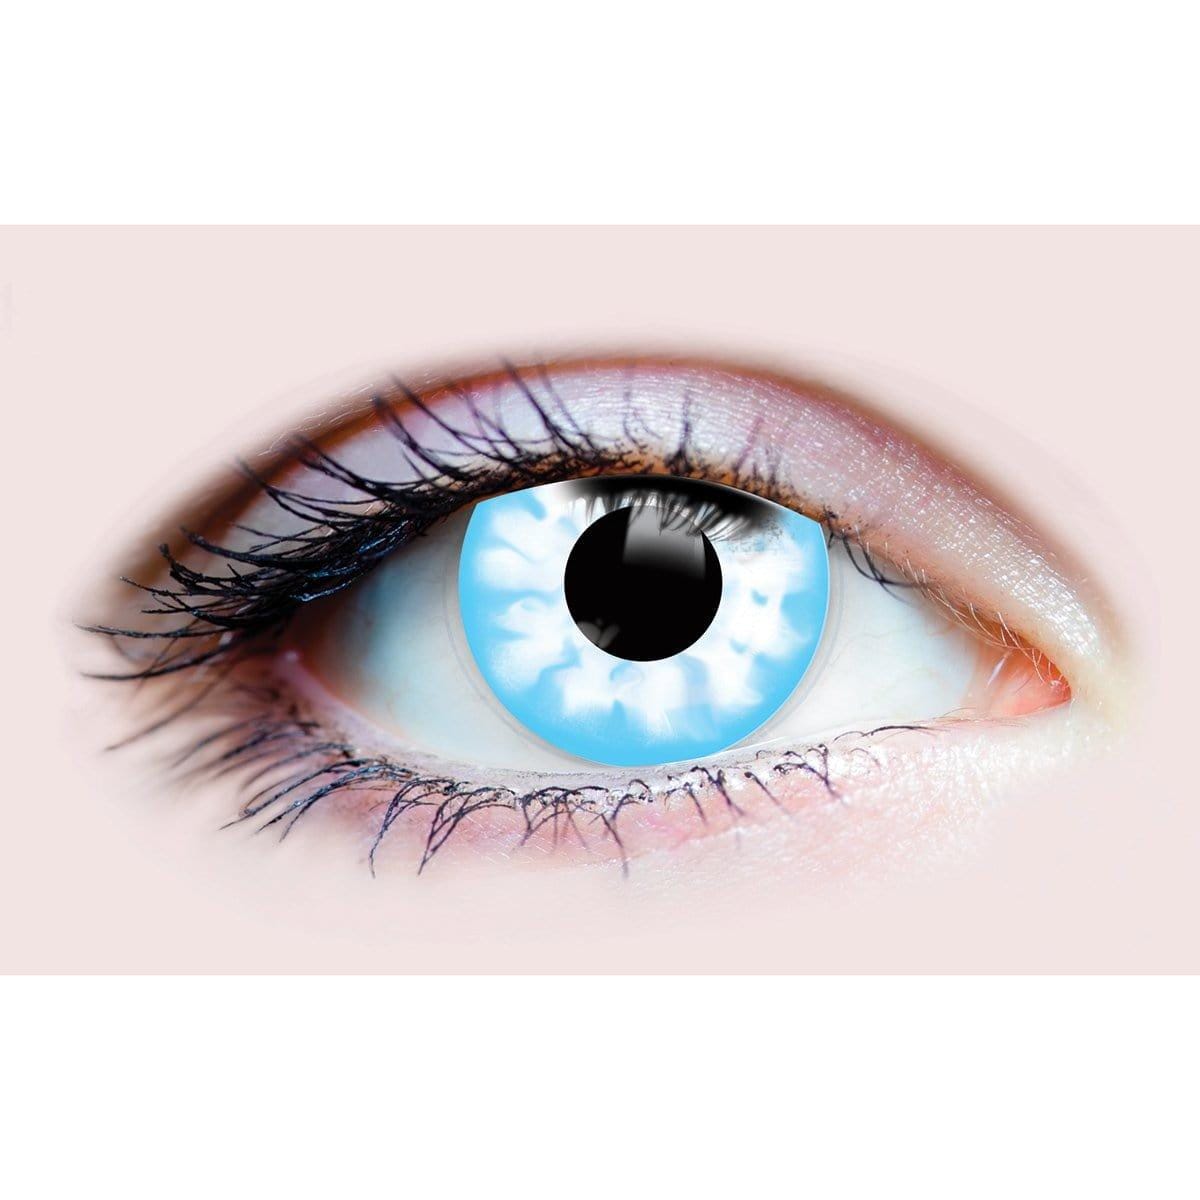 Buy Costume Accessories Night King contact lenses, 3 months usage sold at Party Expert